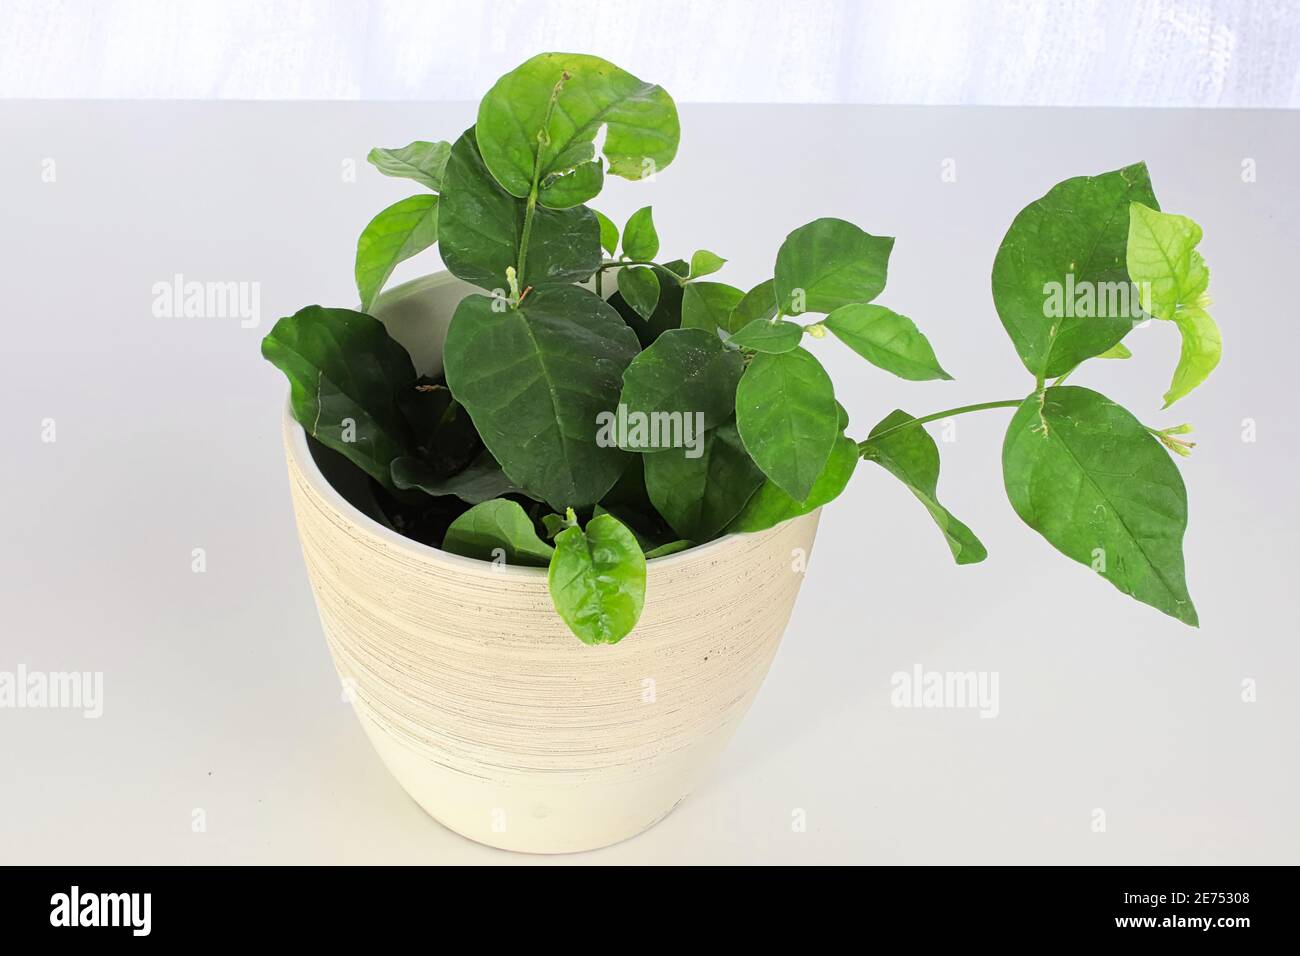 Pot with a jasmine plant on a white table and background Stock Photo